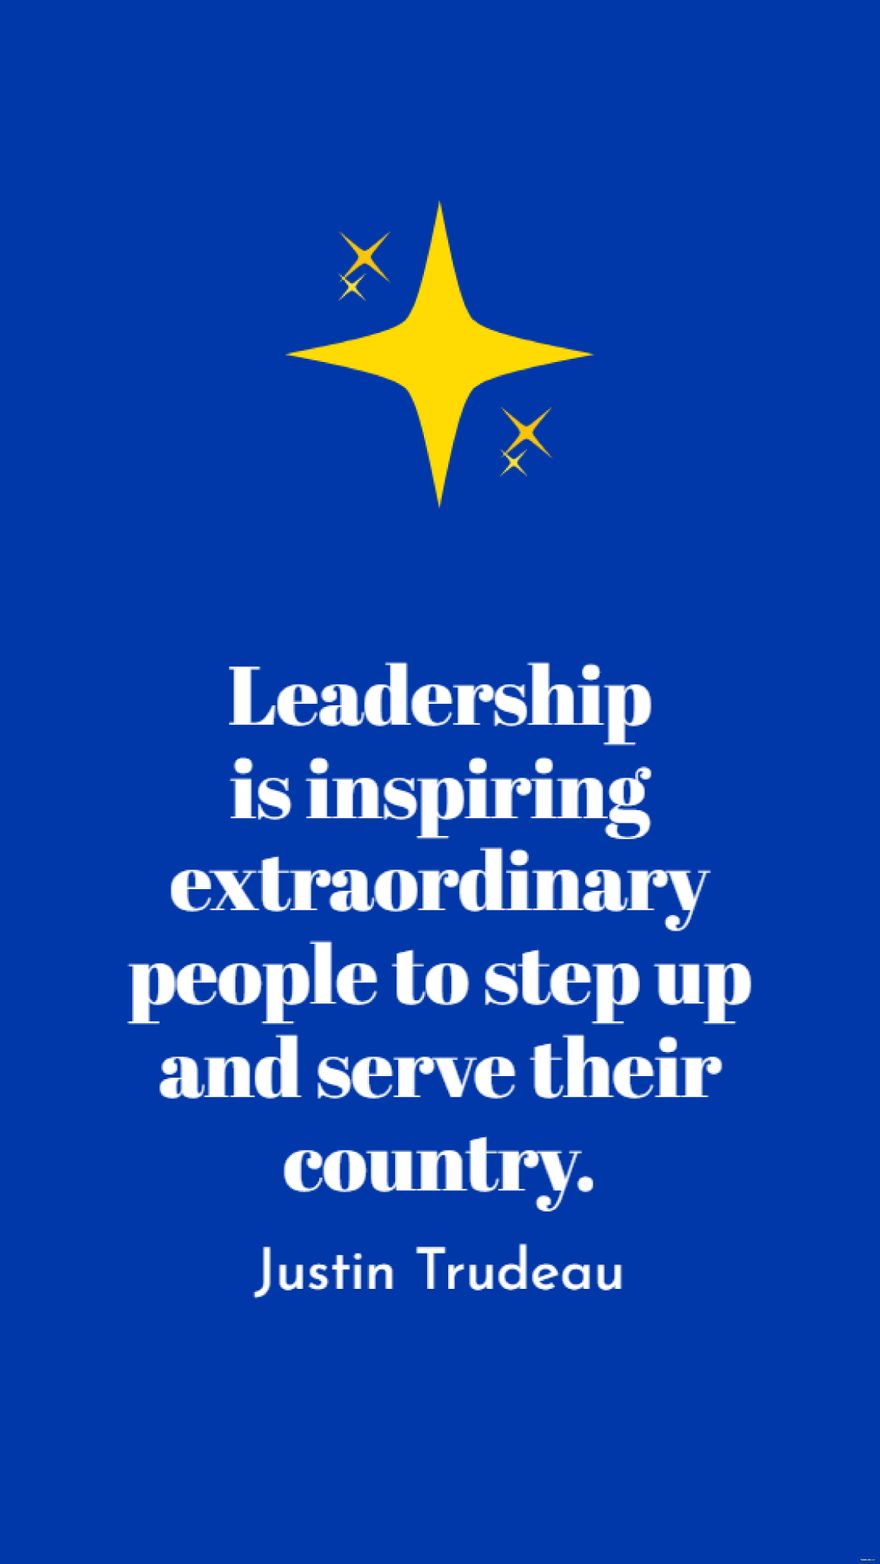 Justin Trudeau - Leadership is inspiring extraordinary people to step up and serve their country.